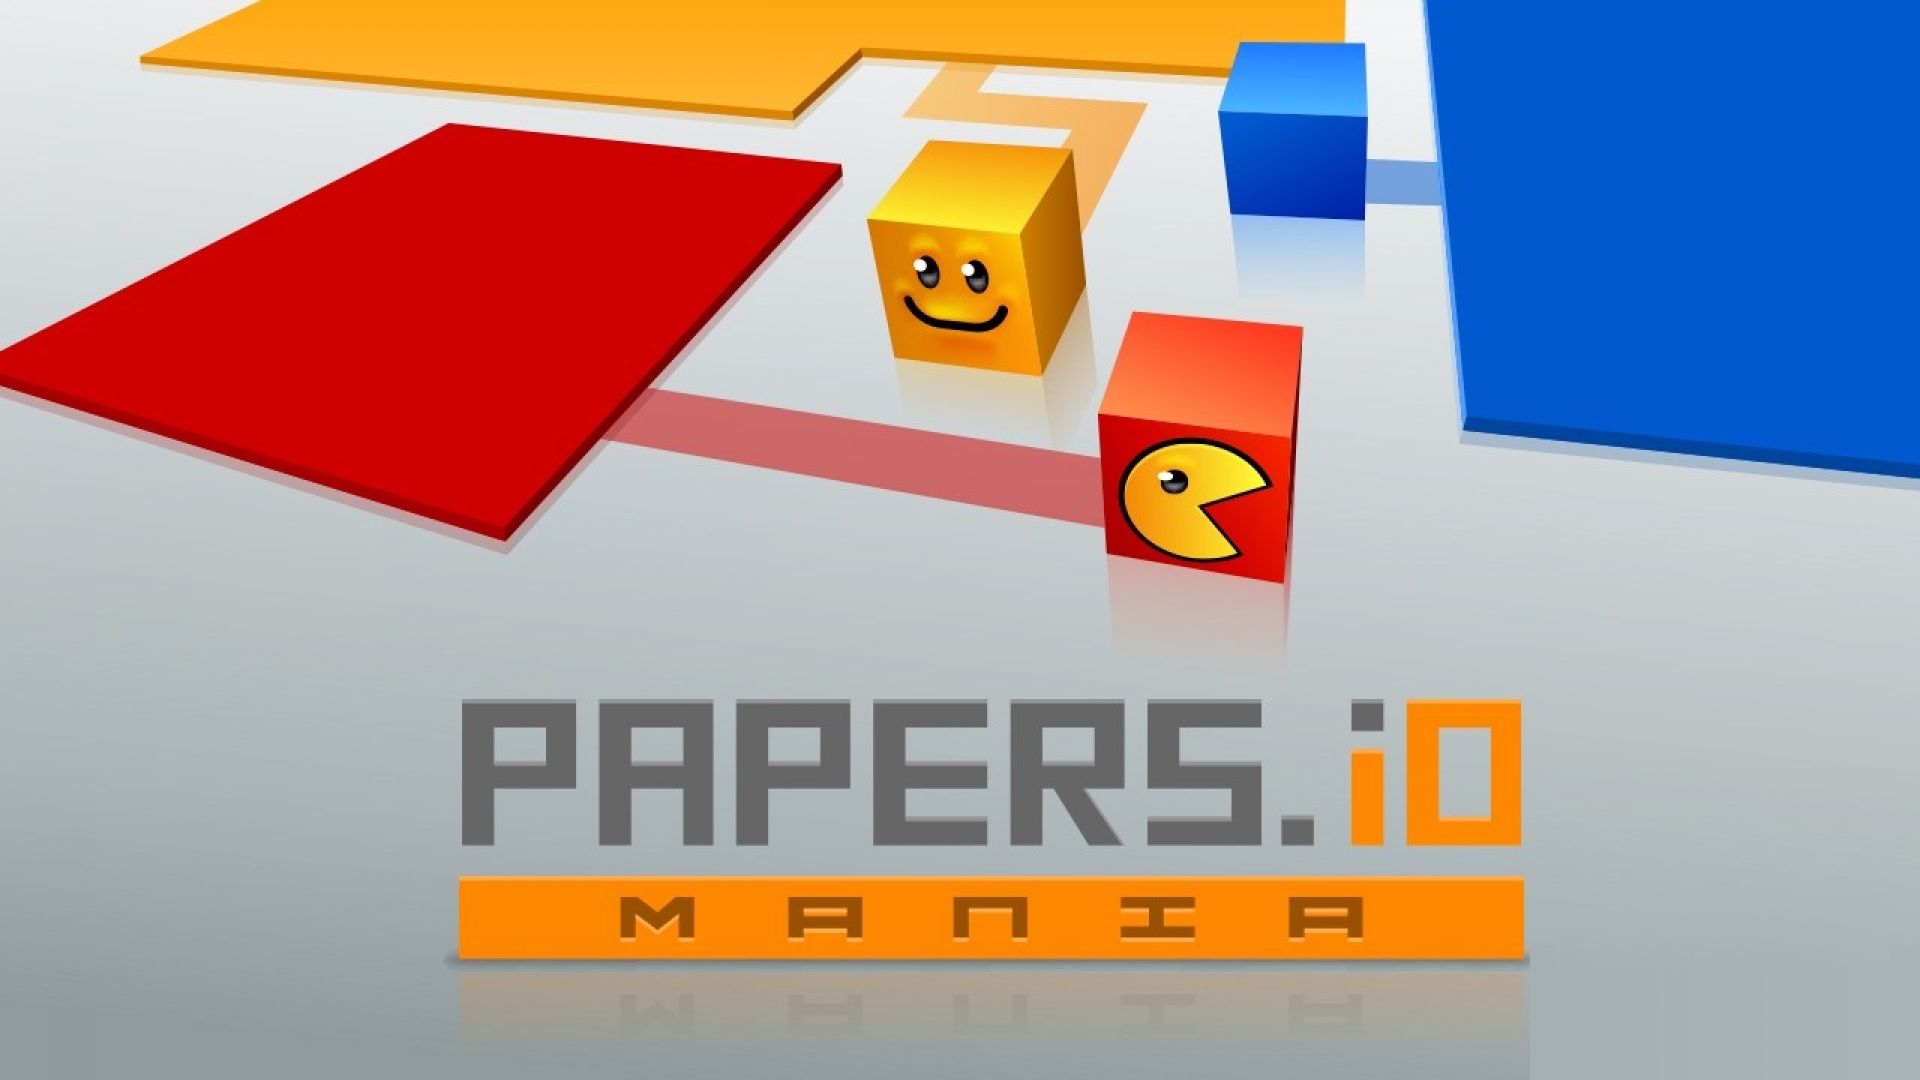 Papers.io Mania